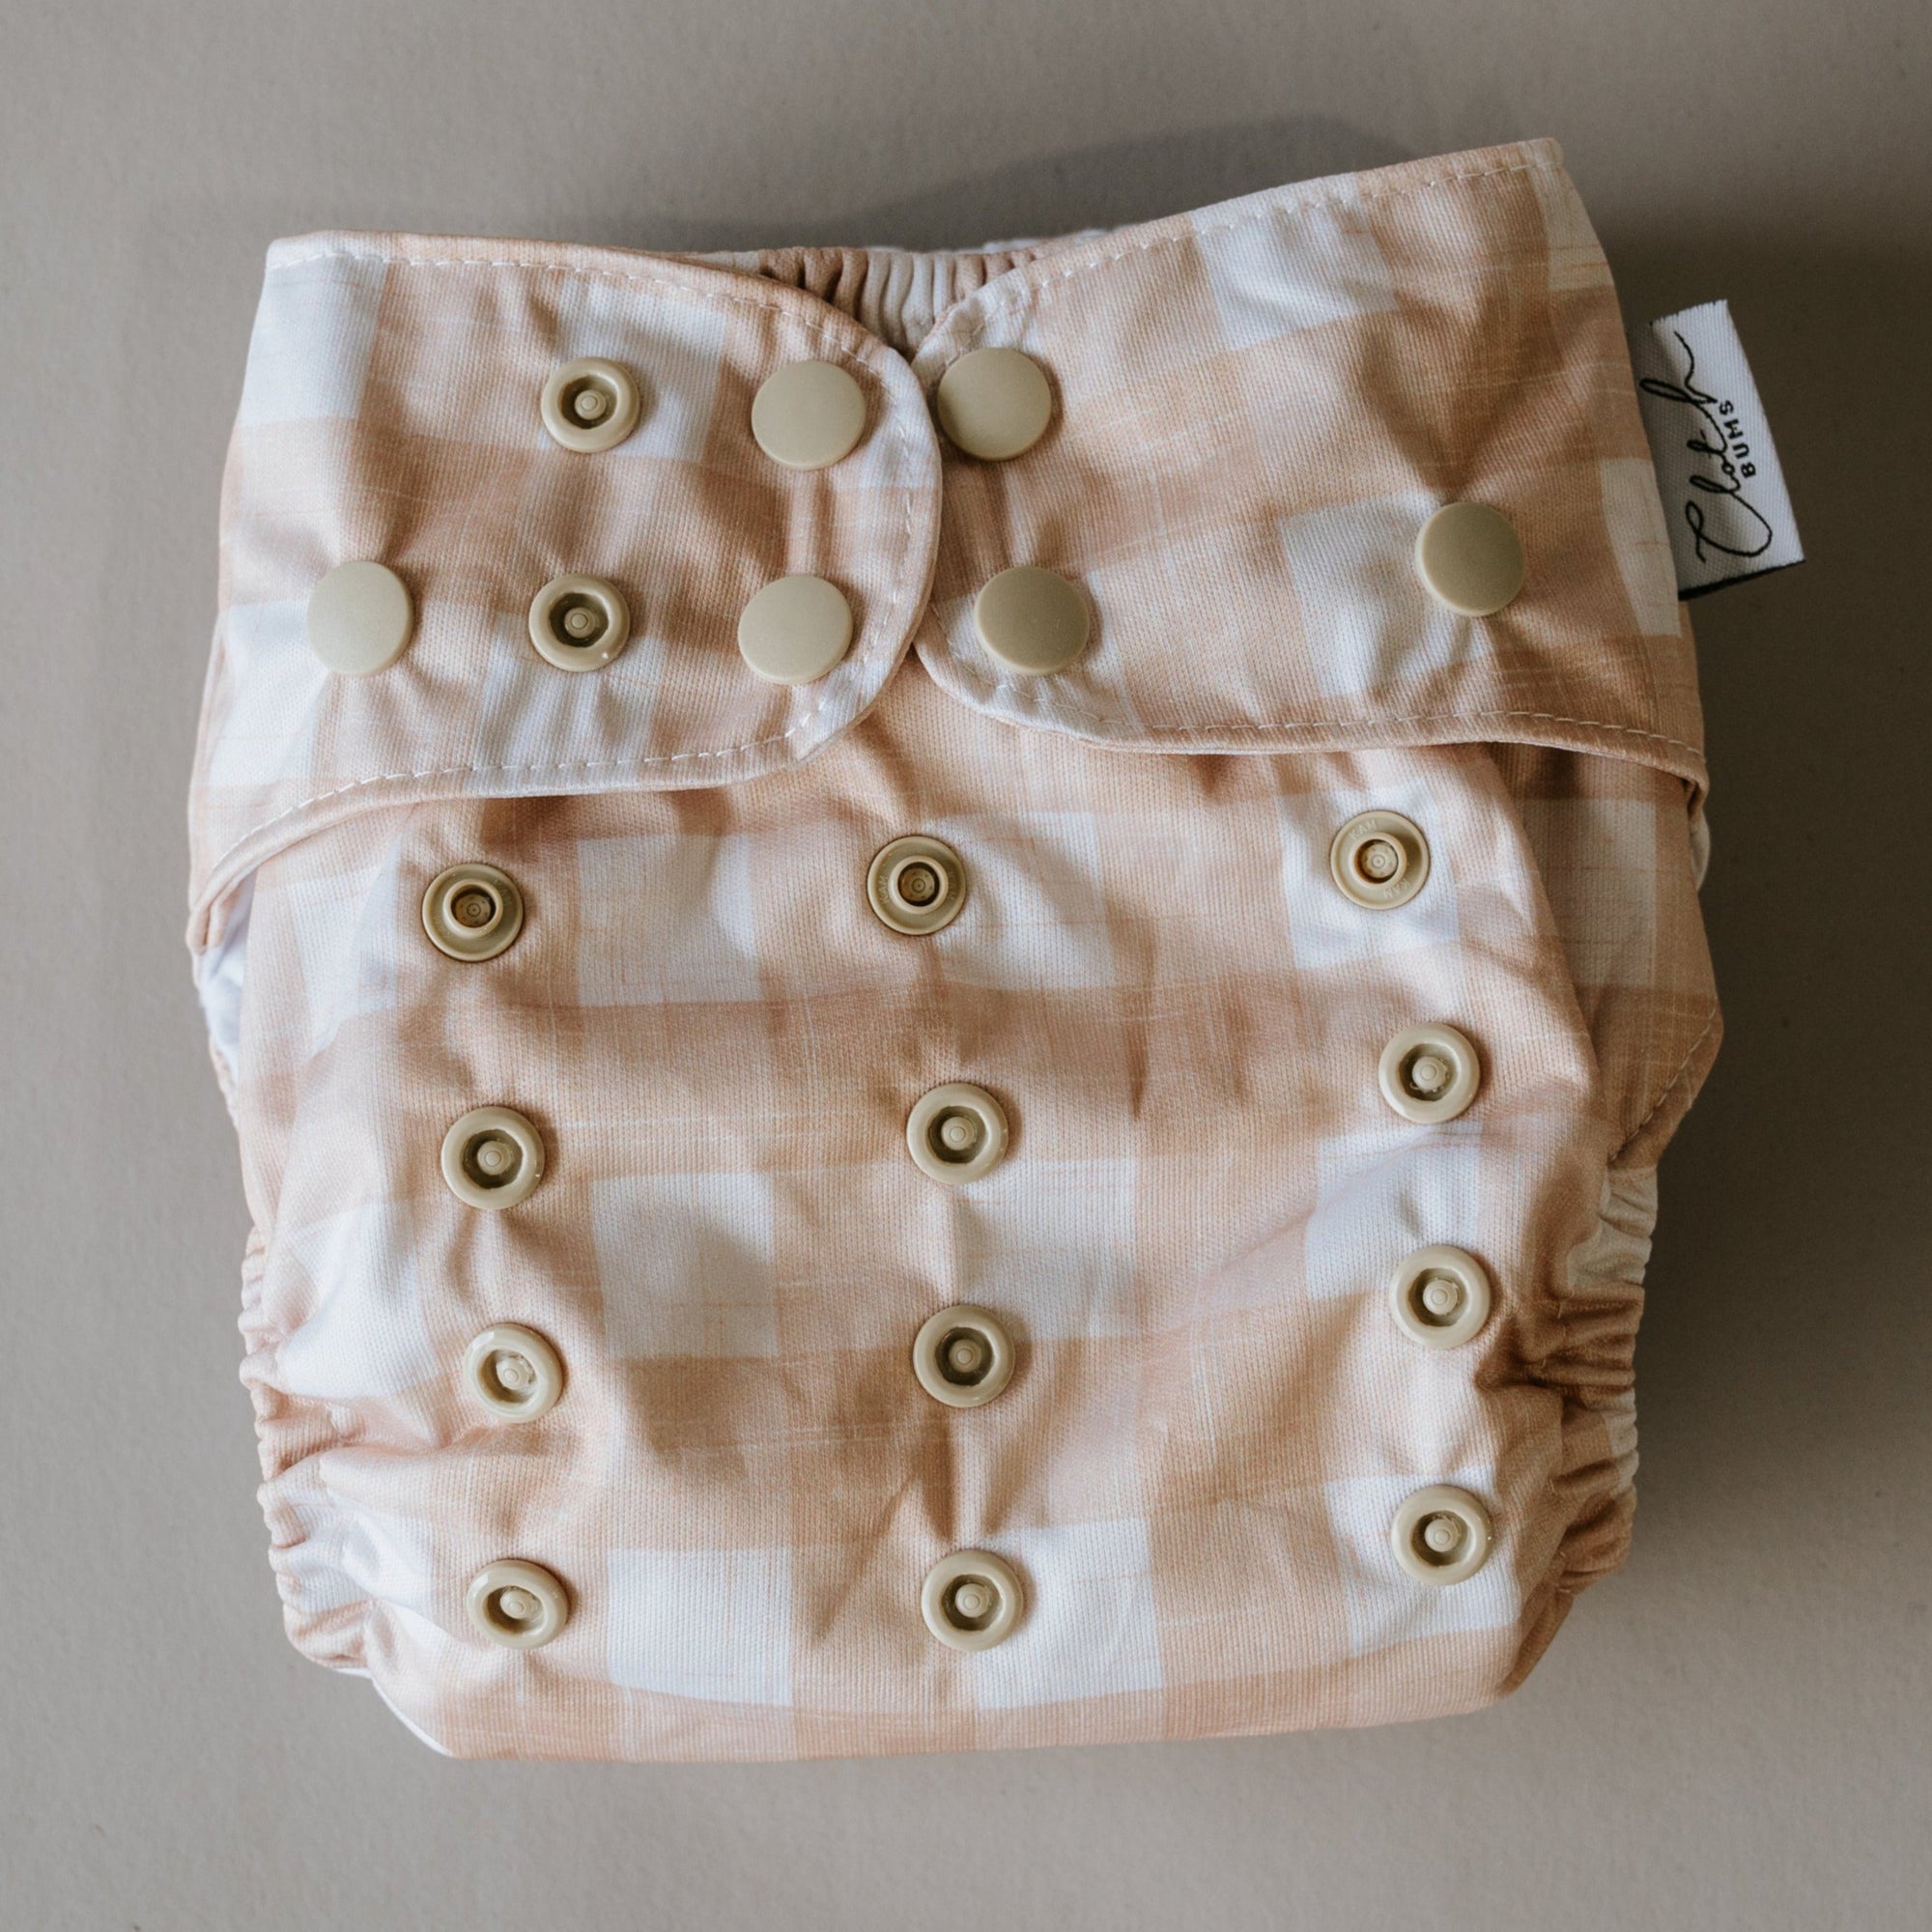 PIXIE One Size Fits Most Cloth Nappy - Champagne